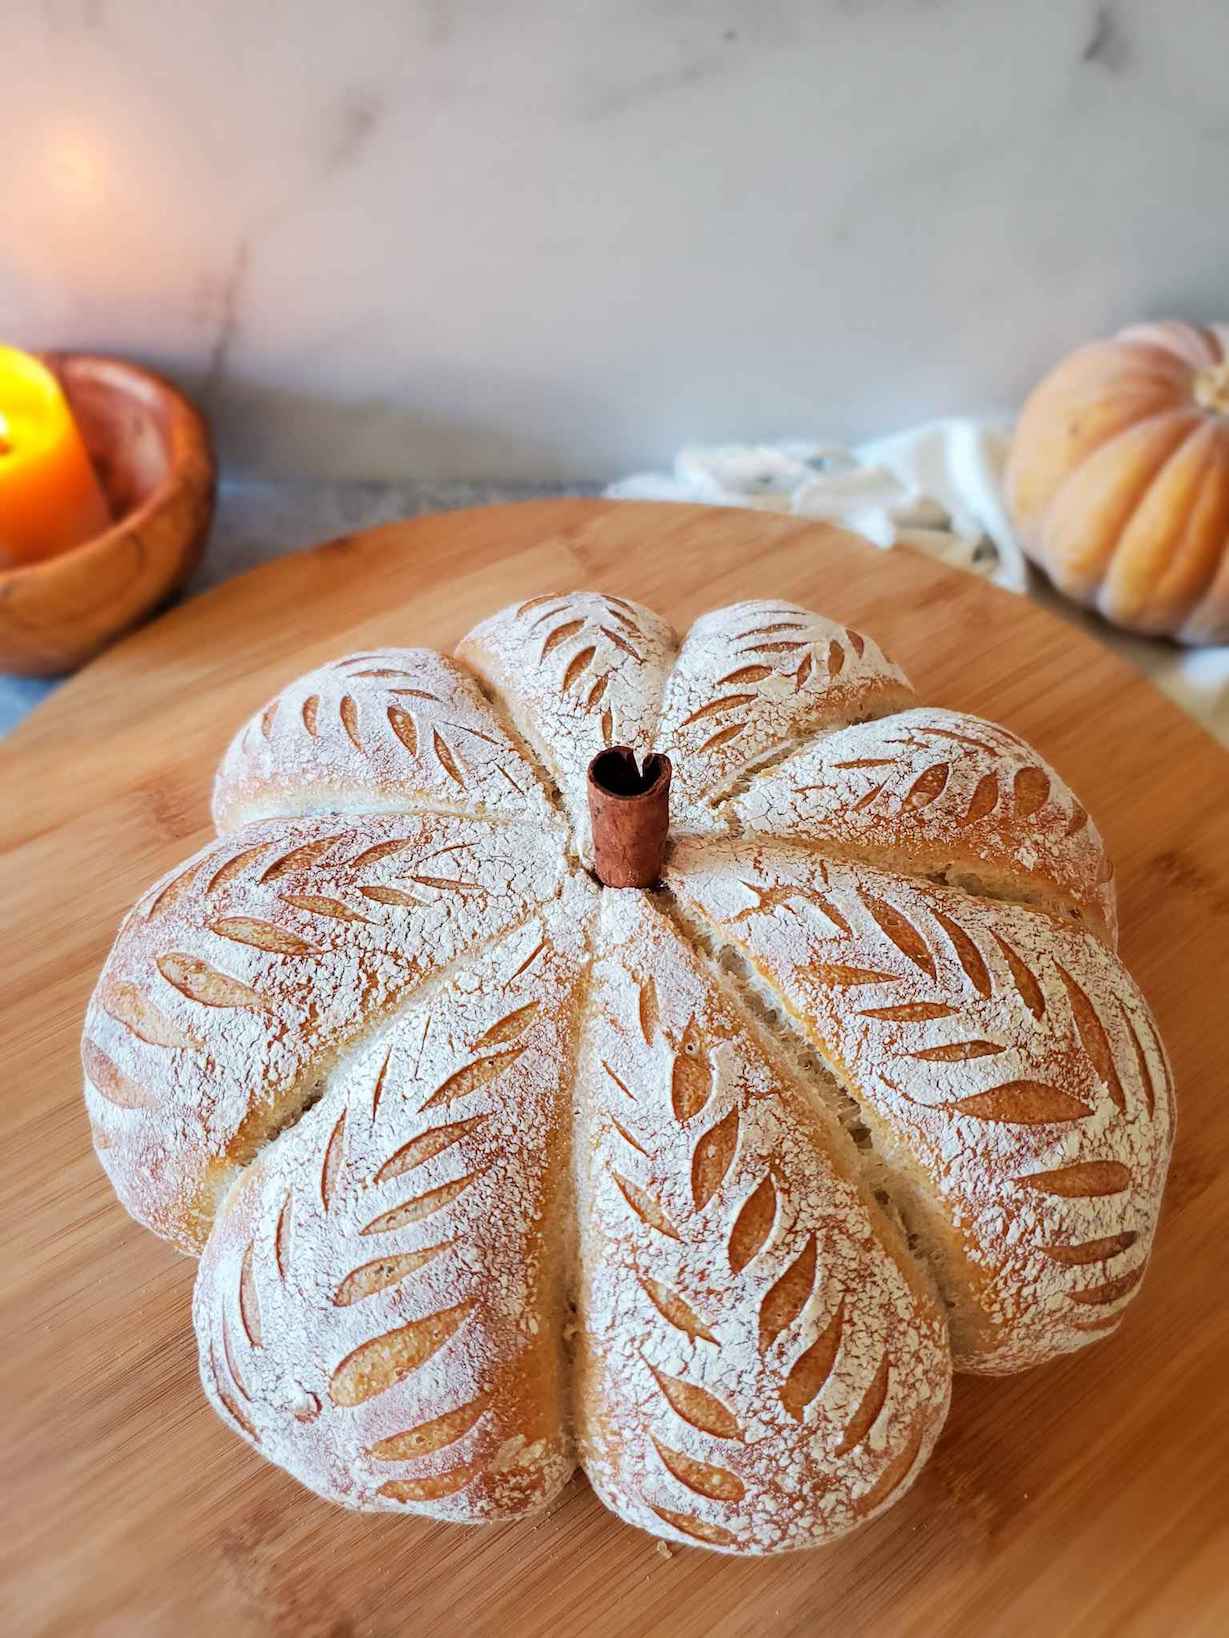 A baked loaf of pumpkin shaped sourdough bread sits atop a circular wooden board. A cinnamon stick has been inserted into the middle of the loaf to act as the stem. A small pumpkin and a candle sit just beyond the board as decor. 